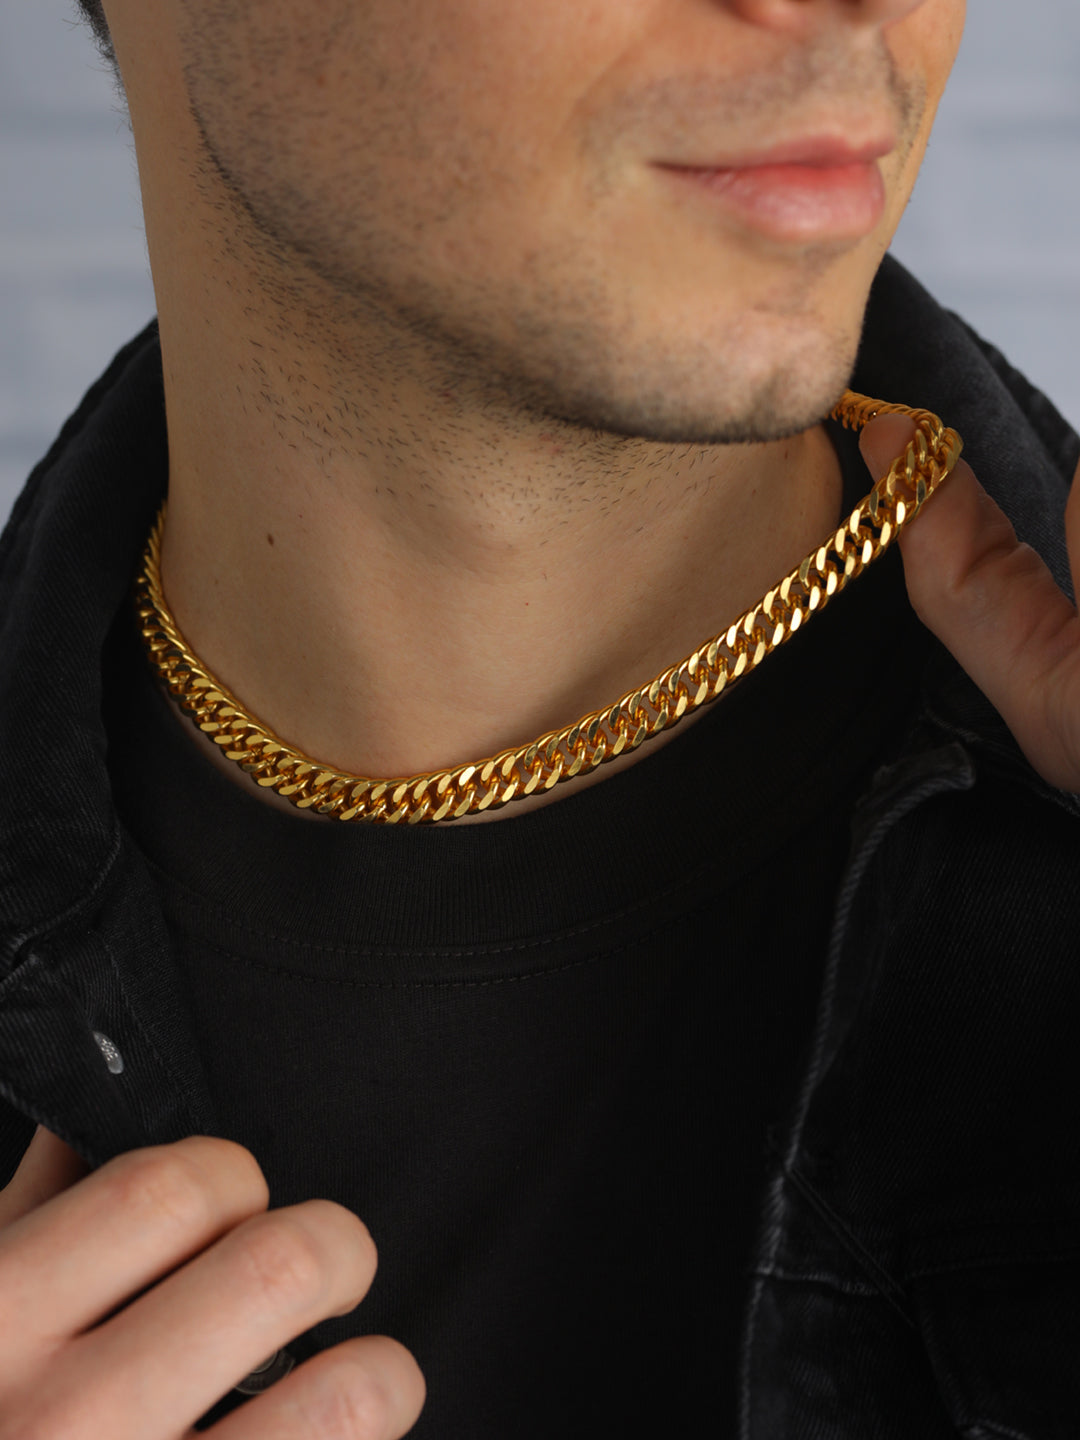 Classic Cuban Gold-Plated Link Chain for Men